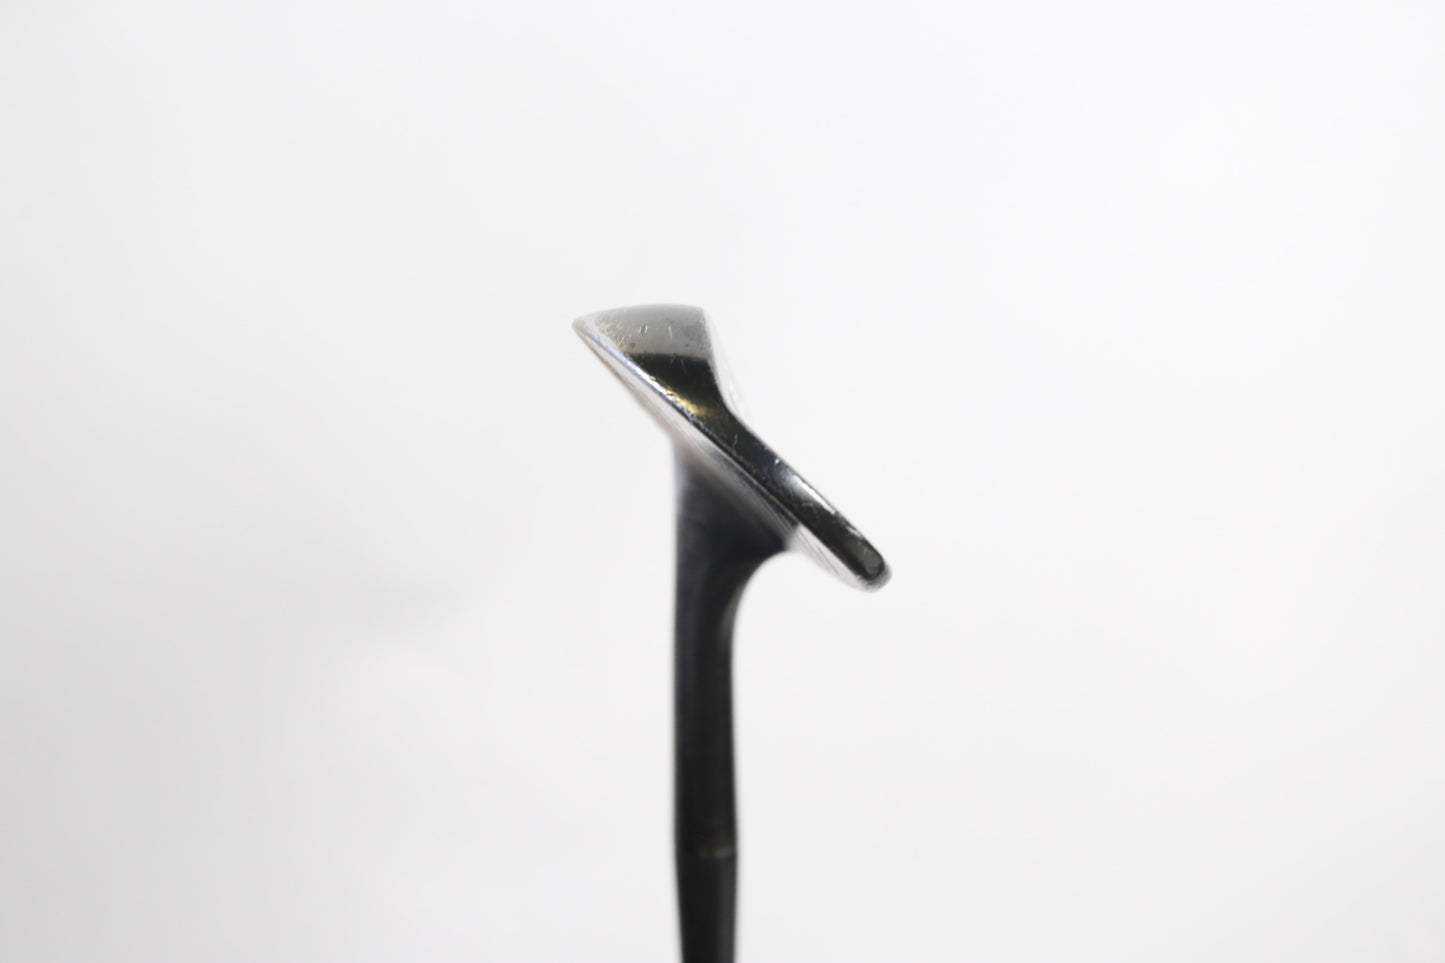 Used Cleveland 588 Forged Black Pearl Gap Wedge - Right-Handed - 52 Degrees - Stiff Flex